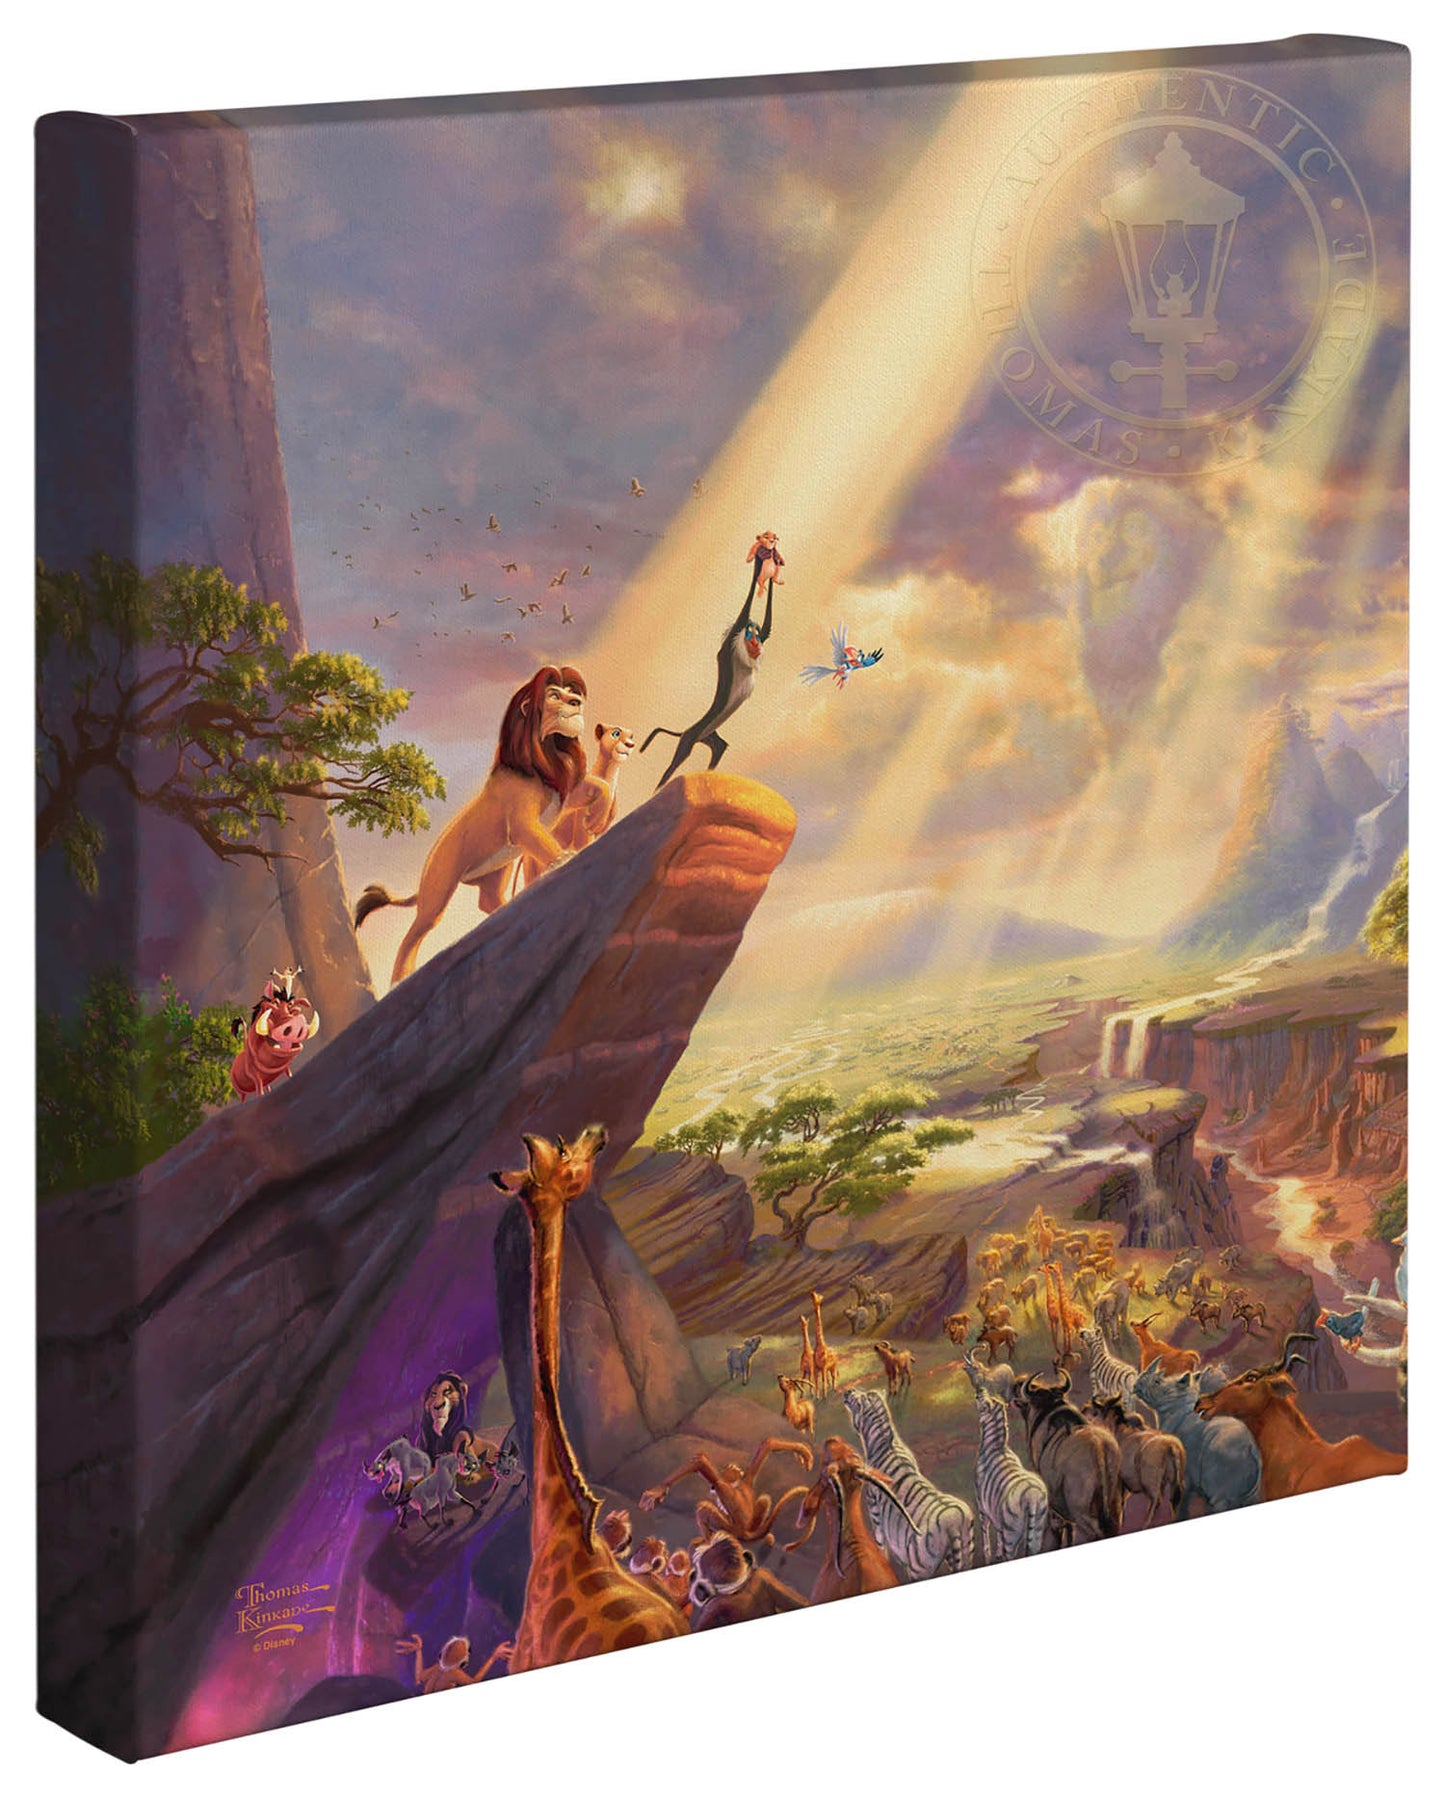 Thomas Kinkade Disney Dreams "The Lion King" Limited and Open Canvas Giclee